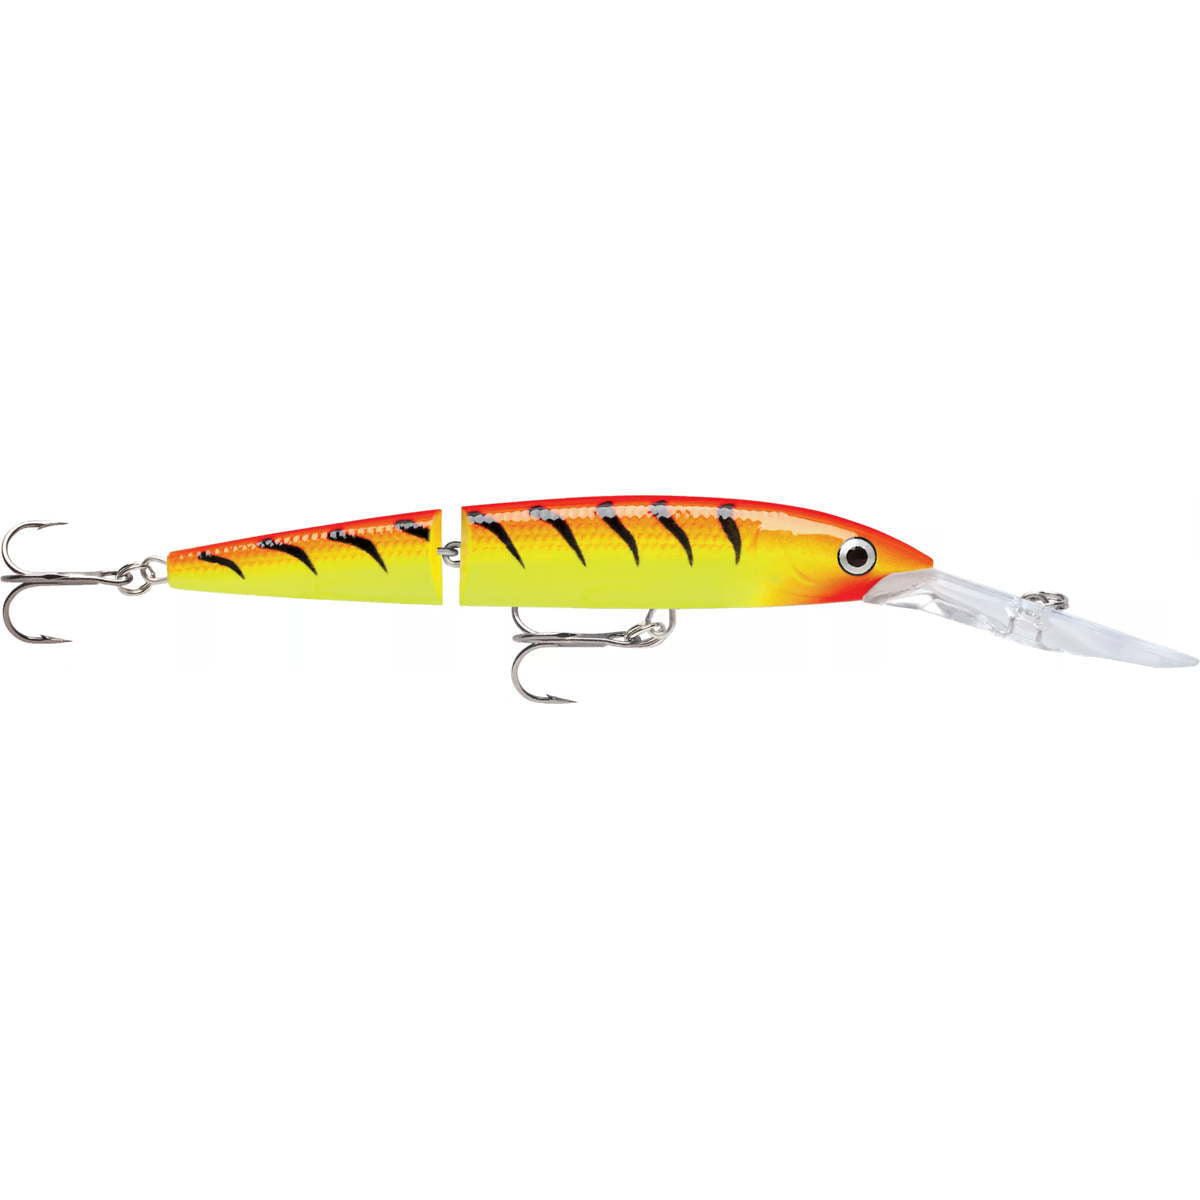 Photo of Rapala Jointed Deep Husky Jerk for sale at United Tackle Shops.